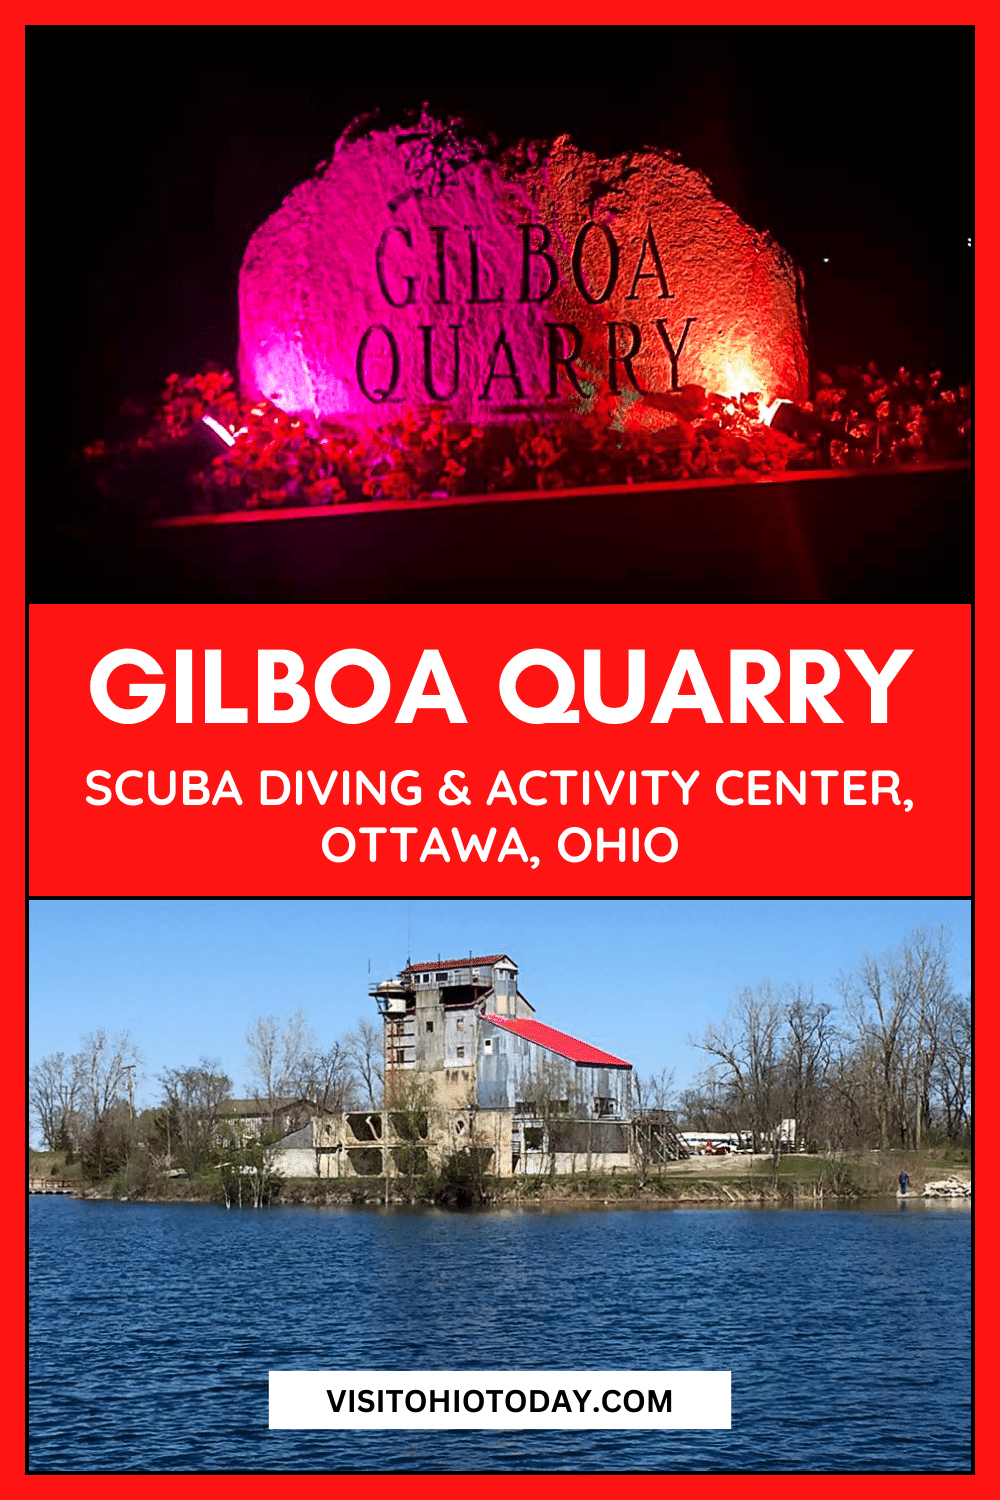 Dive into the adventure of a lifetime at Gilboa Quarry in Ottawa, Ohio! Whether you're a seasoned diver or a newbie, Gilboa Quarry offers crystal-clear waters, amazing underwater sights, and a friendly diving community. Explore sunken treasures, unique underwater environments, and perfect your skills in one of the Midwest's premier diving spots.